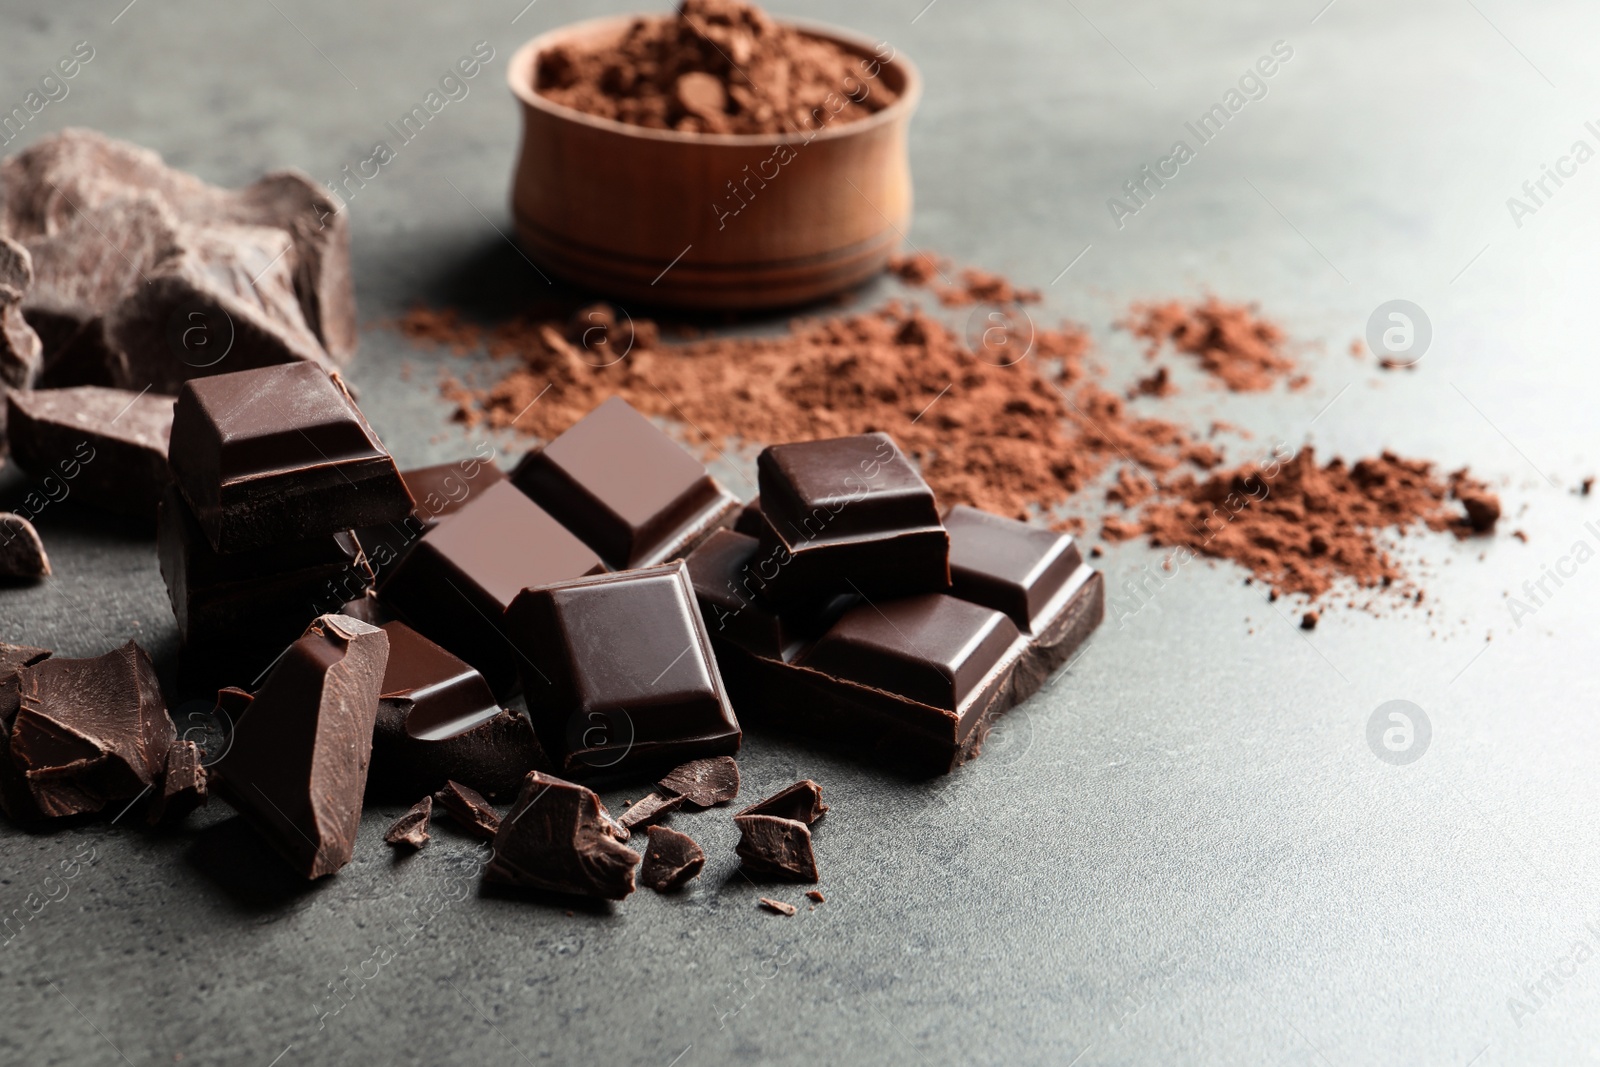 Photo of Pieces of chocolate and cocoa powder on grey background